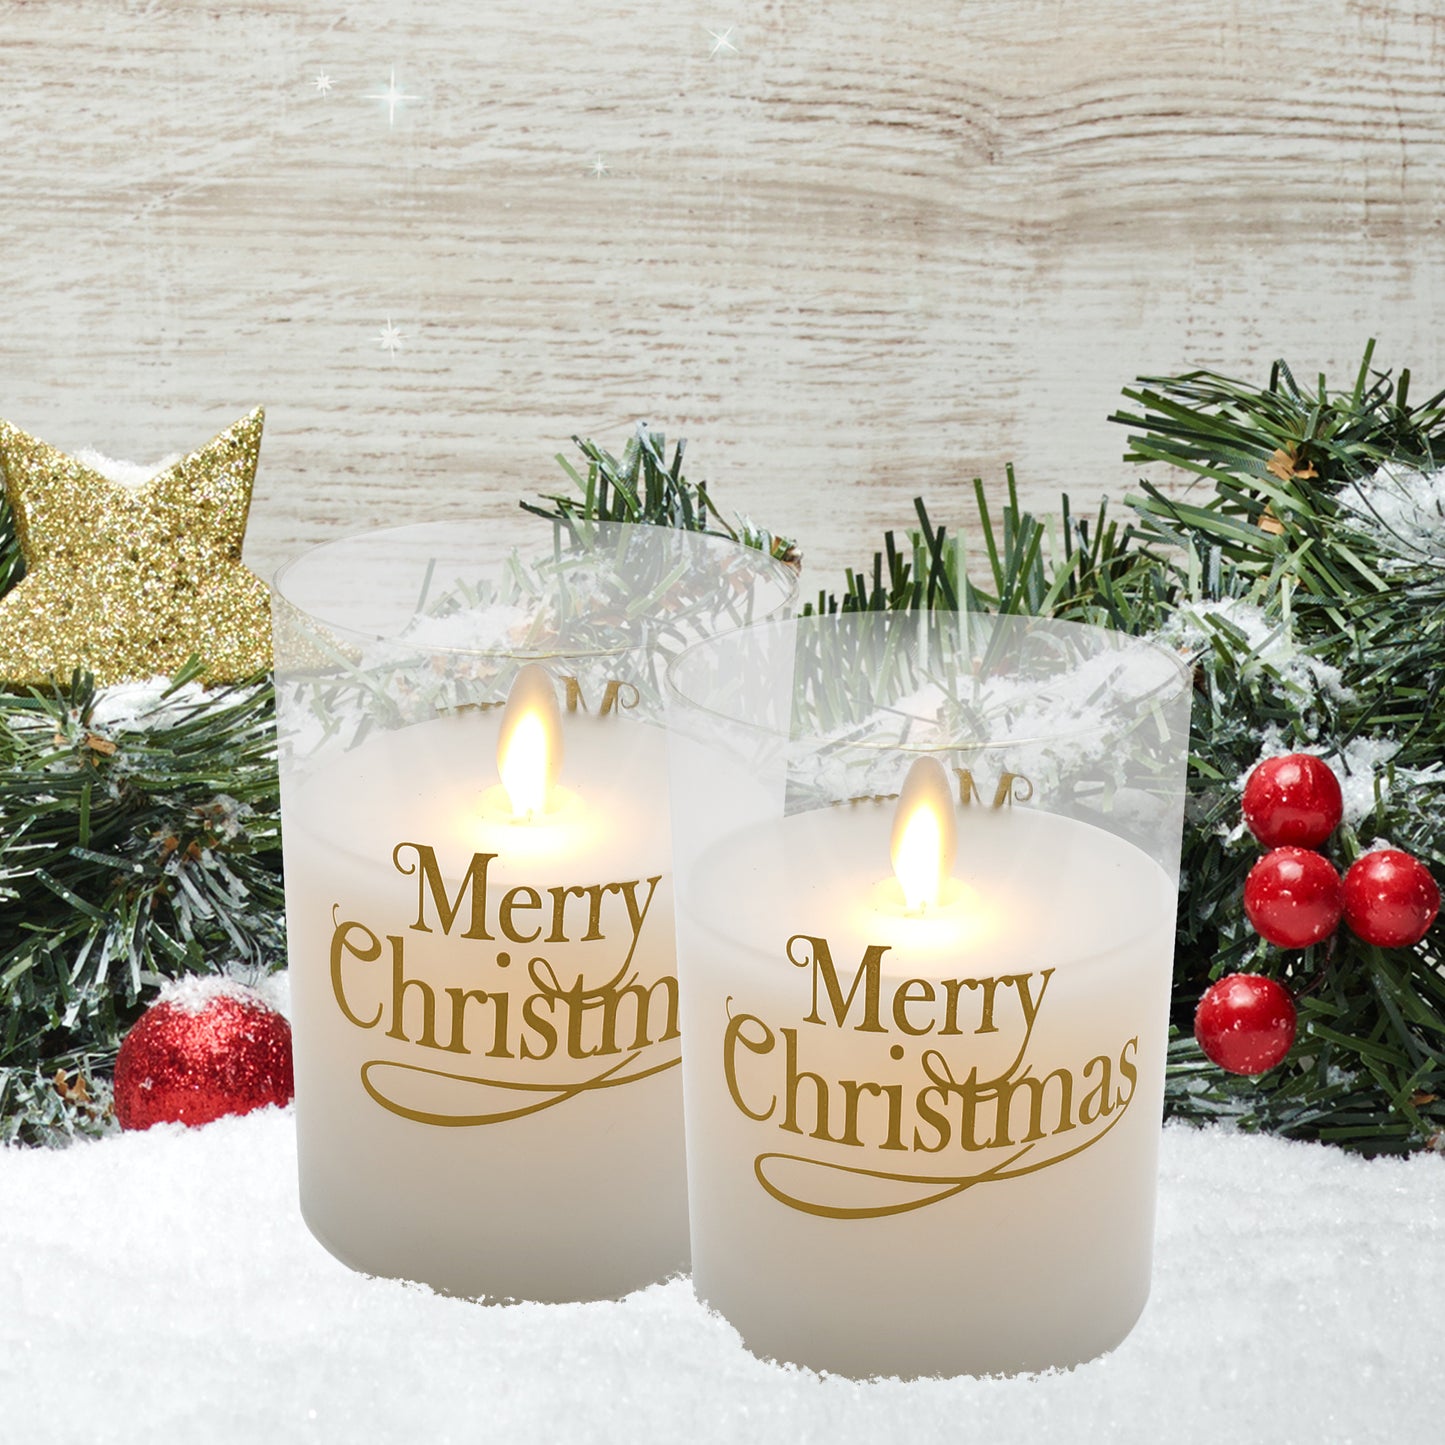 Battery Operated Glass LED Candles with Flickering Flame, Merry Christmas - Set of 2